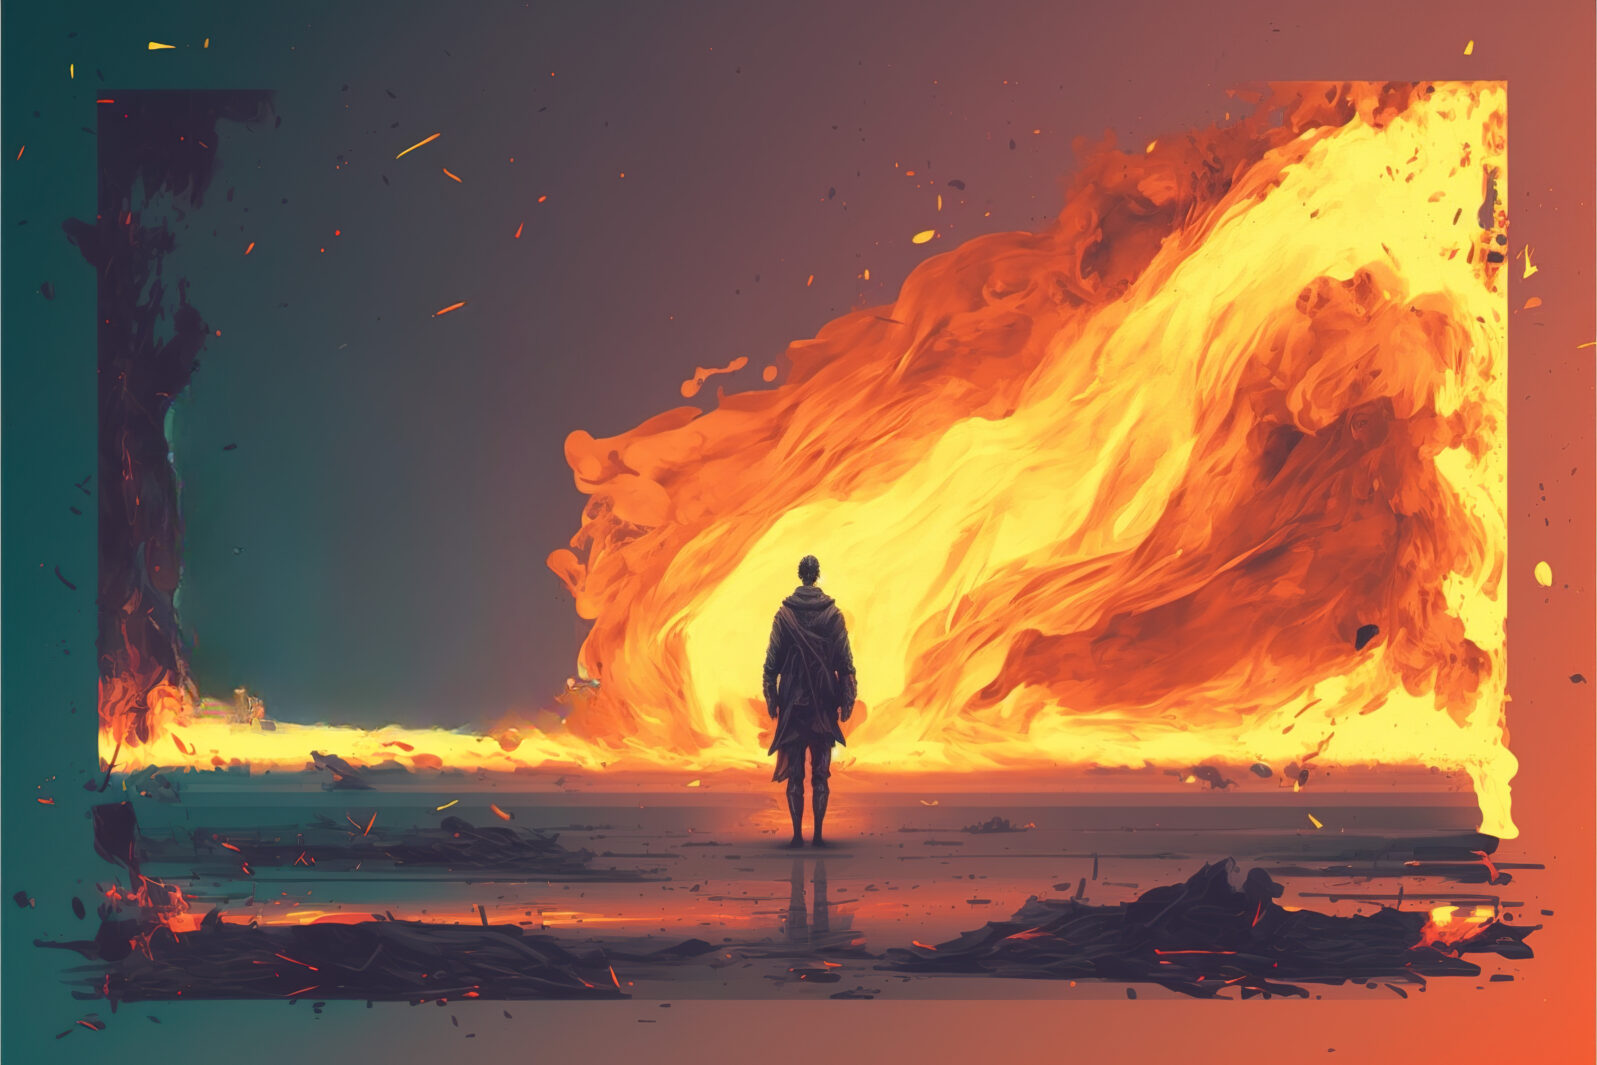 Man and flames, inspired by Fahrenheit 451. Gegenrative AI.